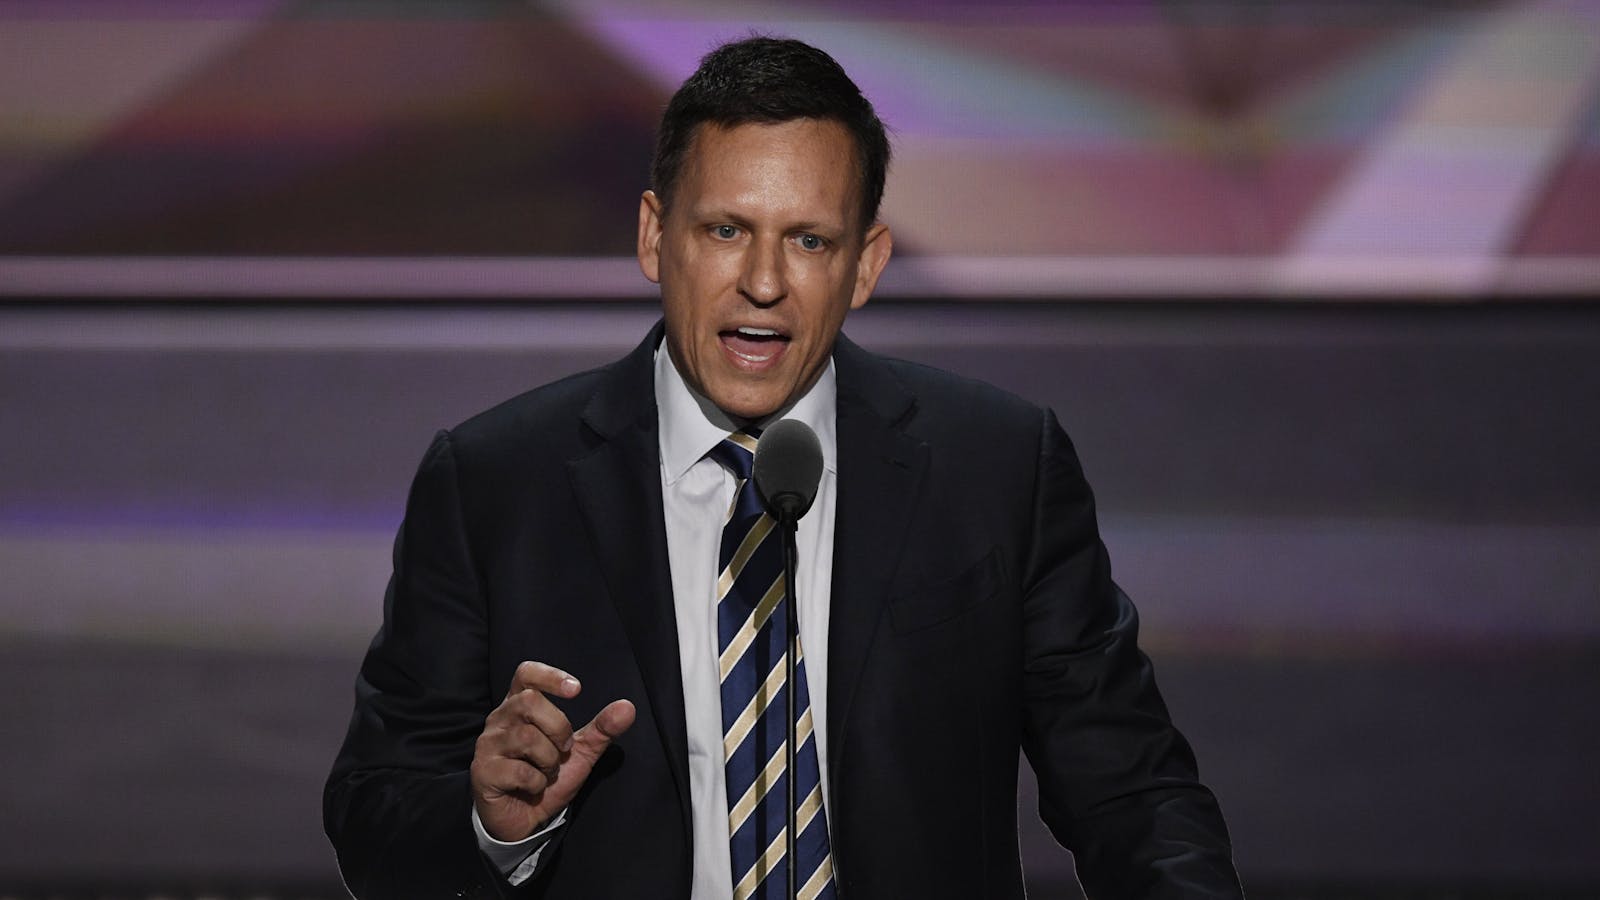 Peter Thiel speaking at the RNC. Photo by Bloomberg.